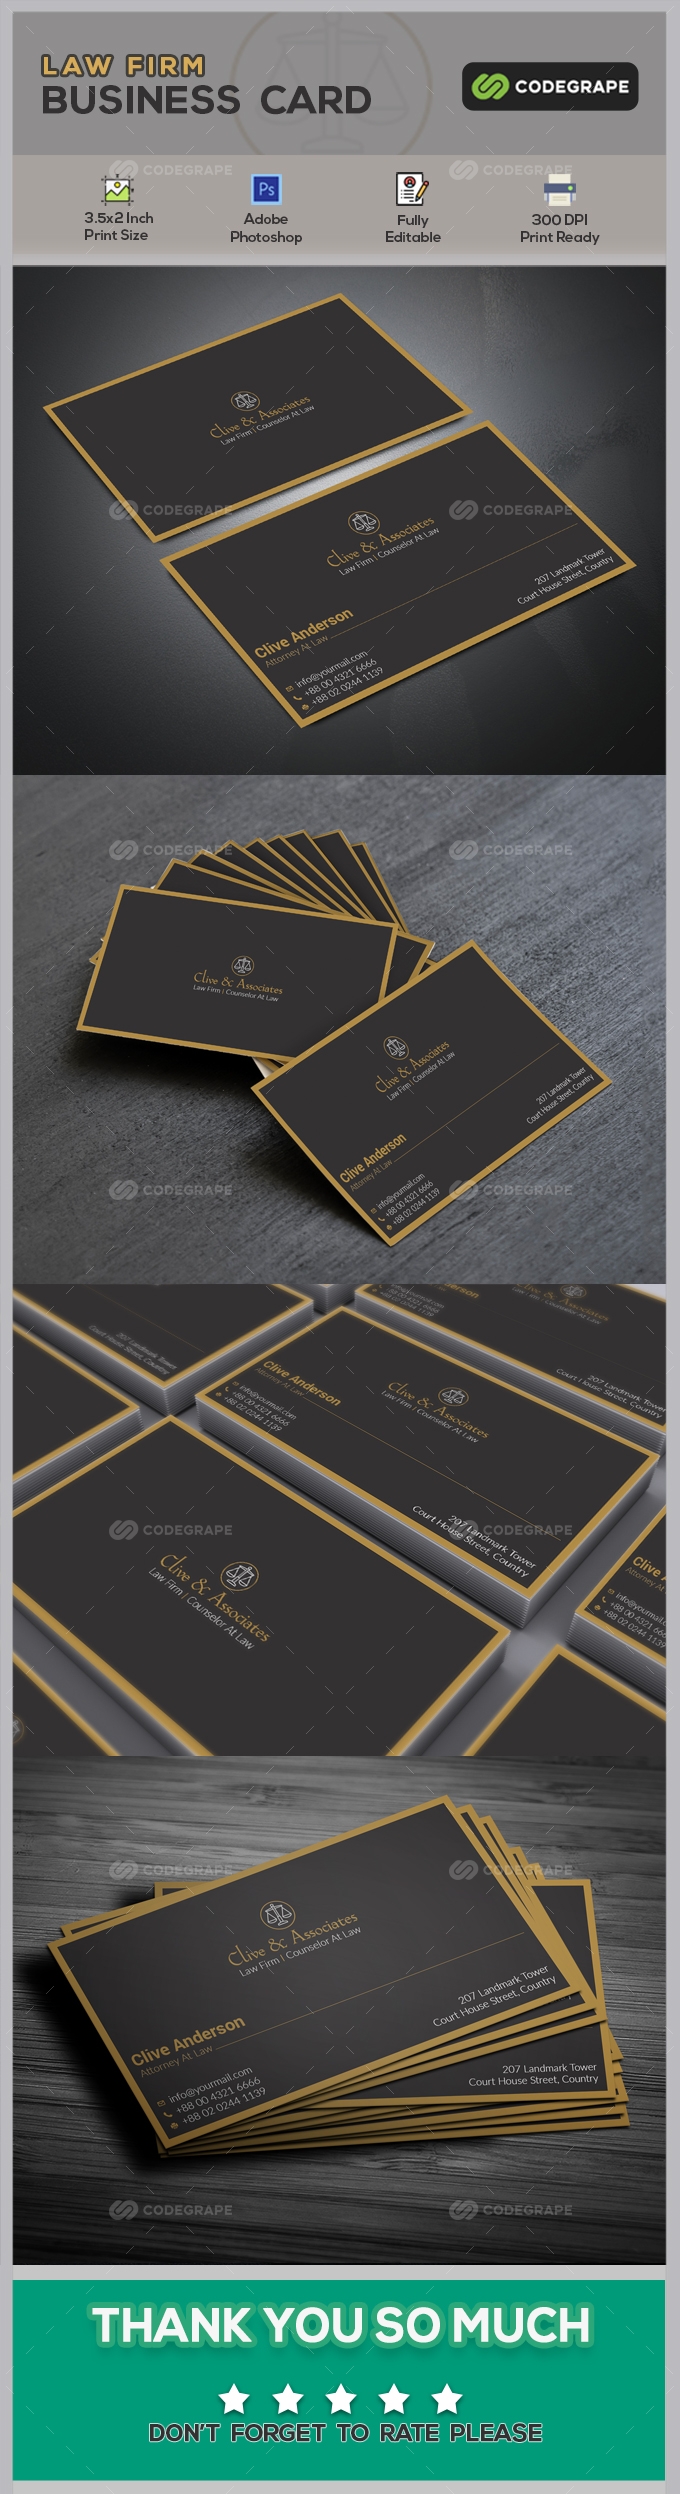 Law Firm Business Card